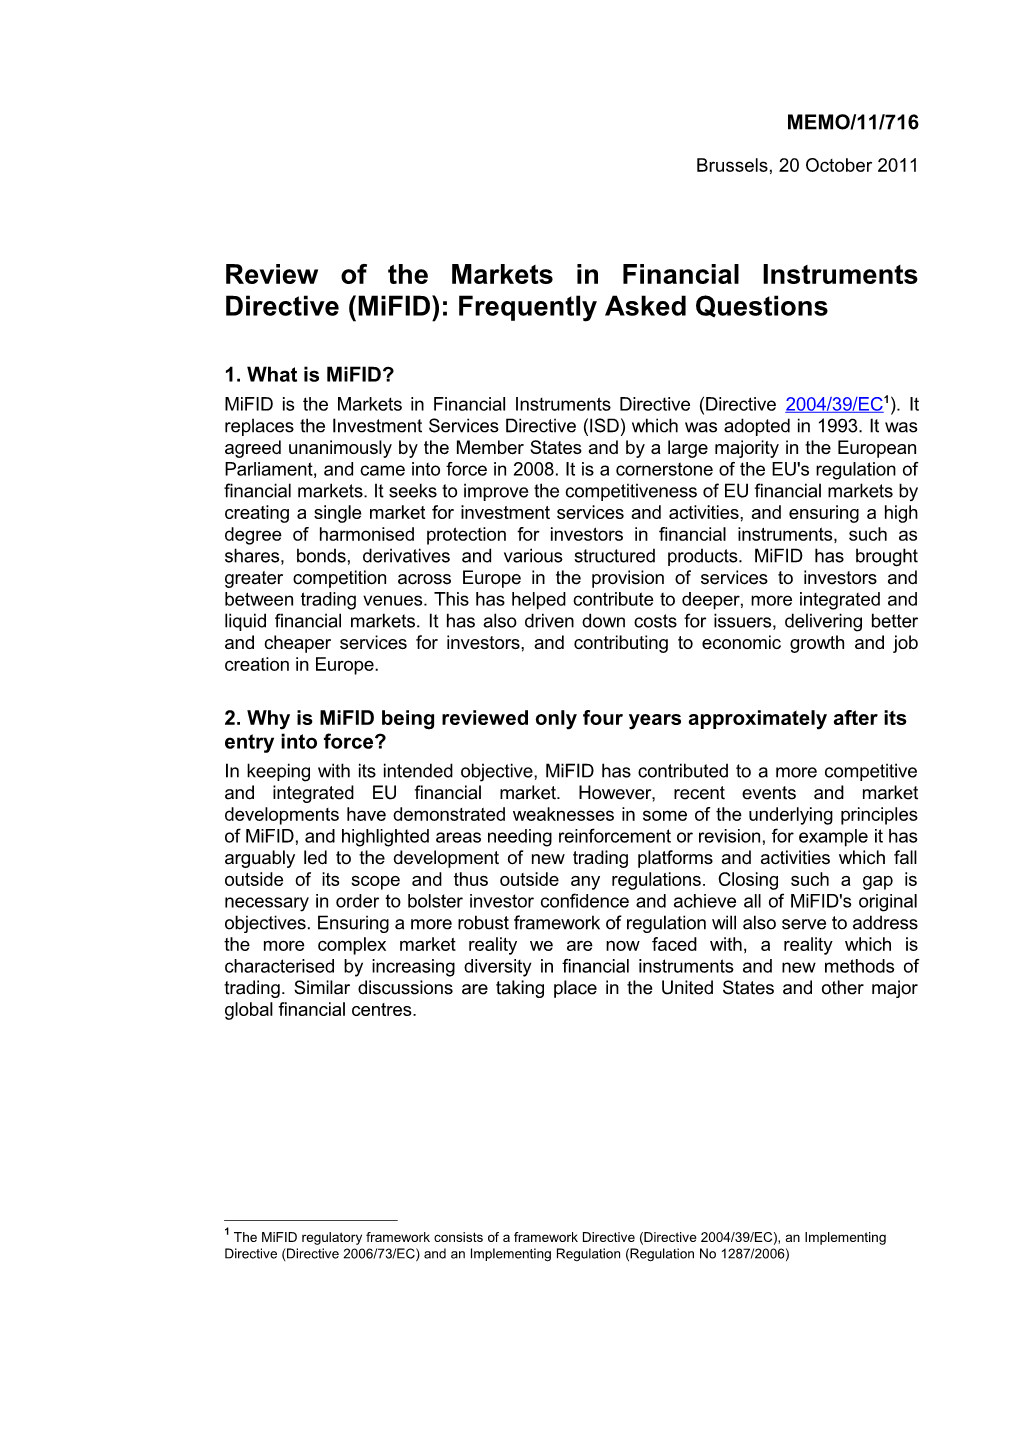 Review of the Markets in Financial Instruments Directive (Mifid): Frequently Asked Questions